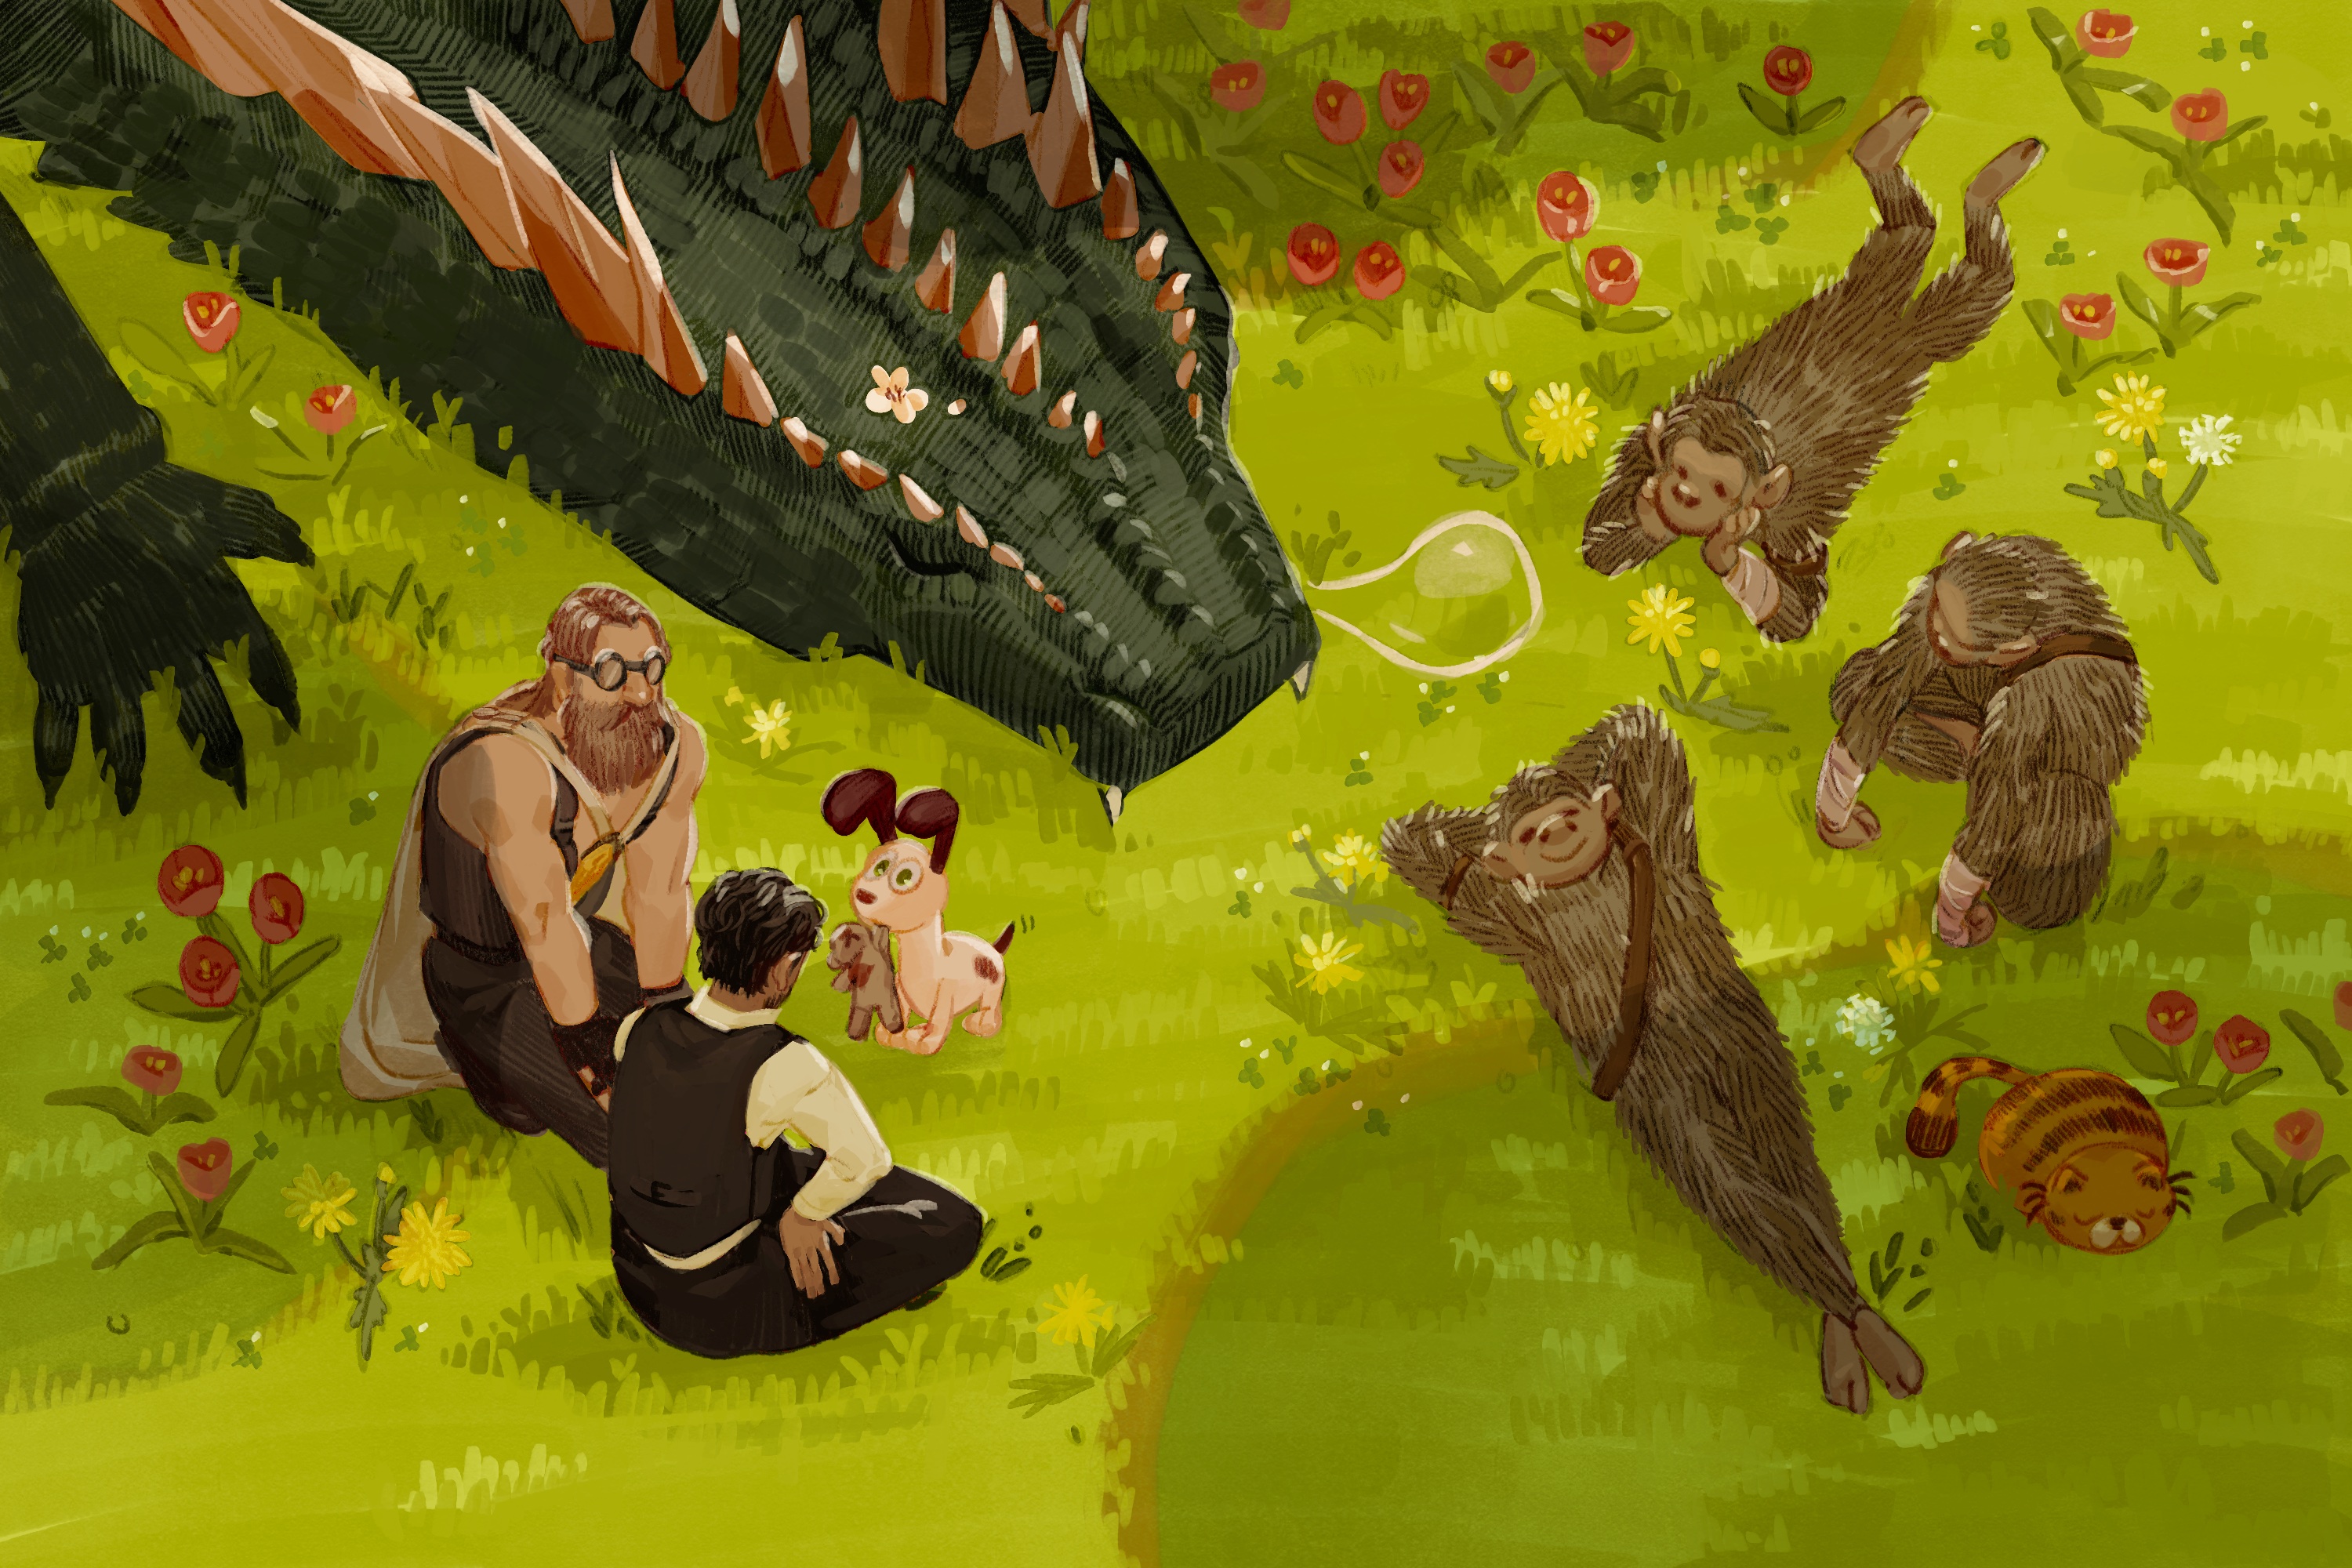 An original illustration shows Godzilla, characters from Planet of the Apes, and others laying on the grass.